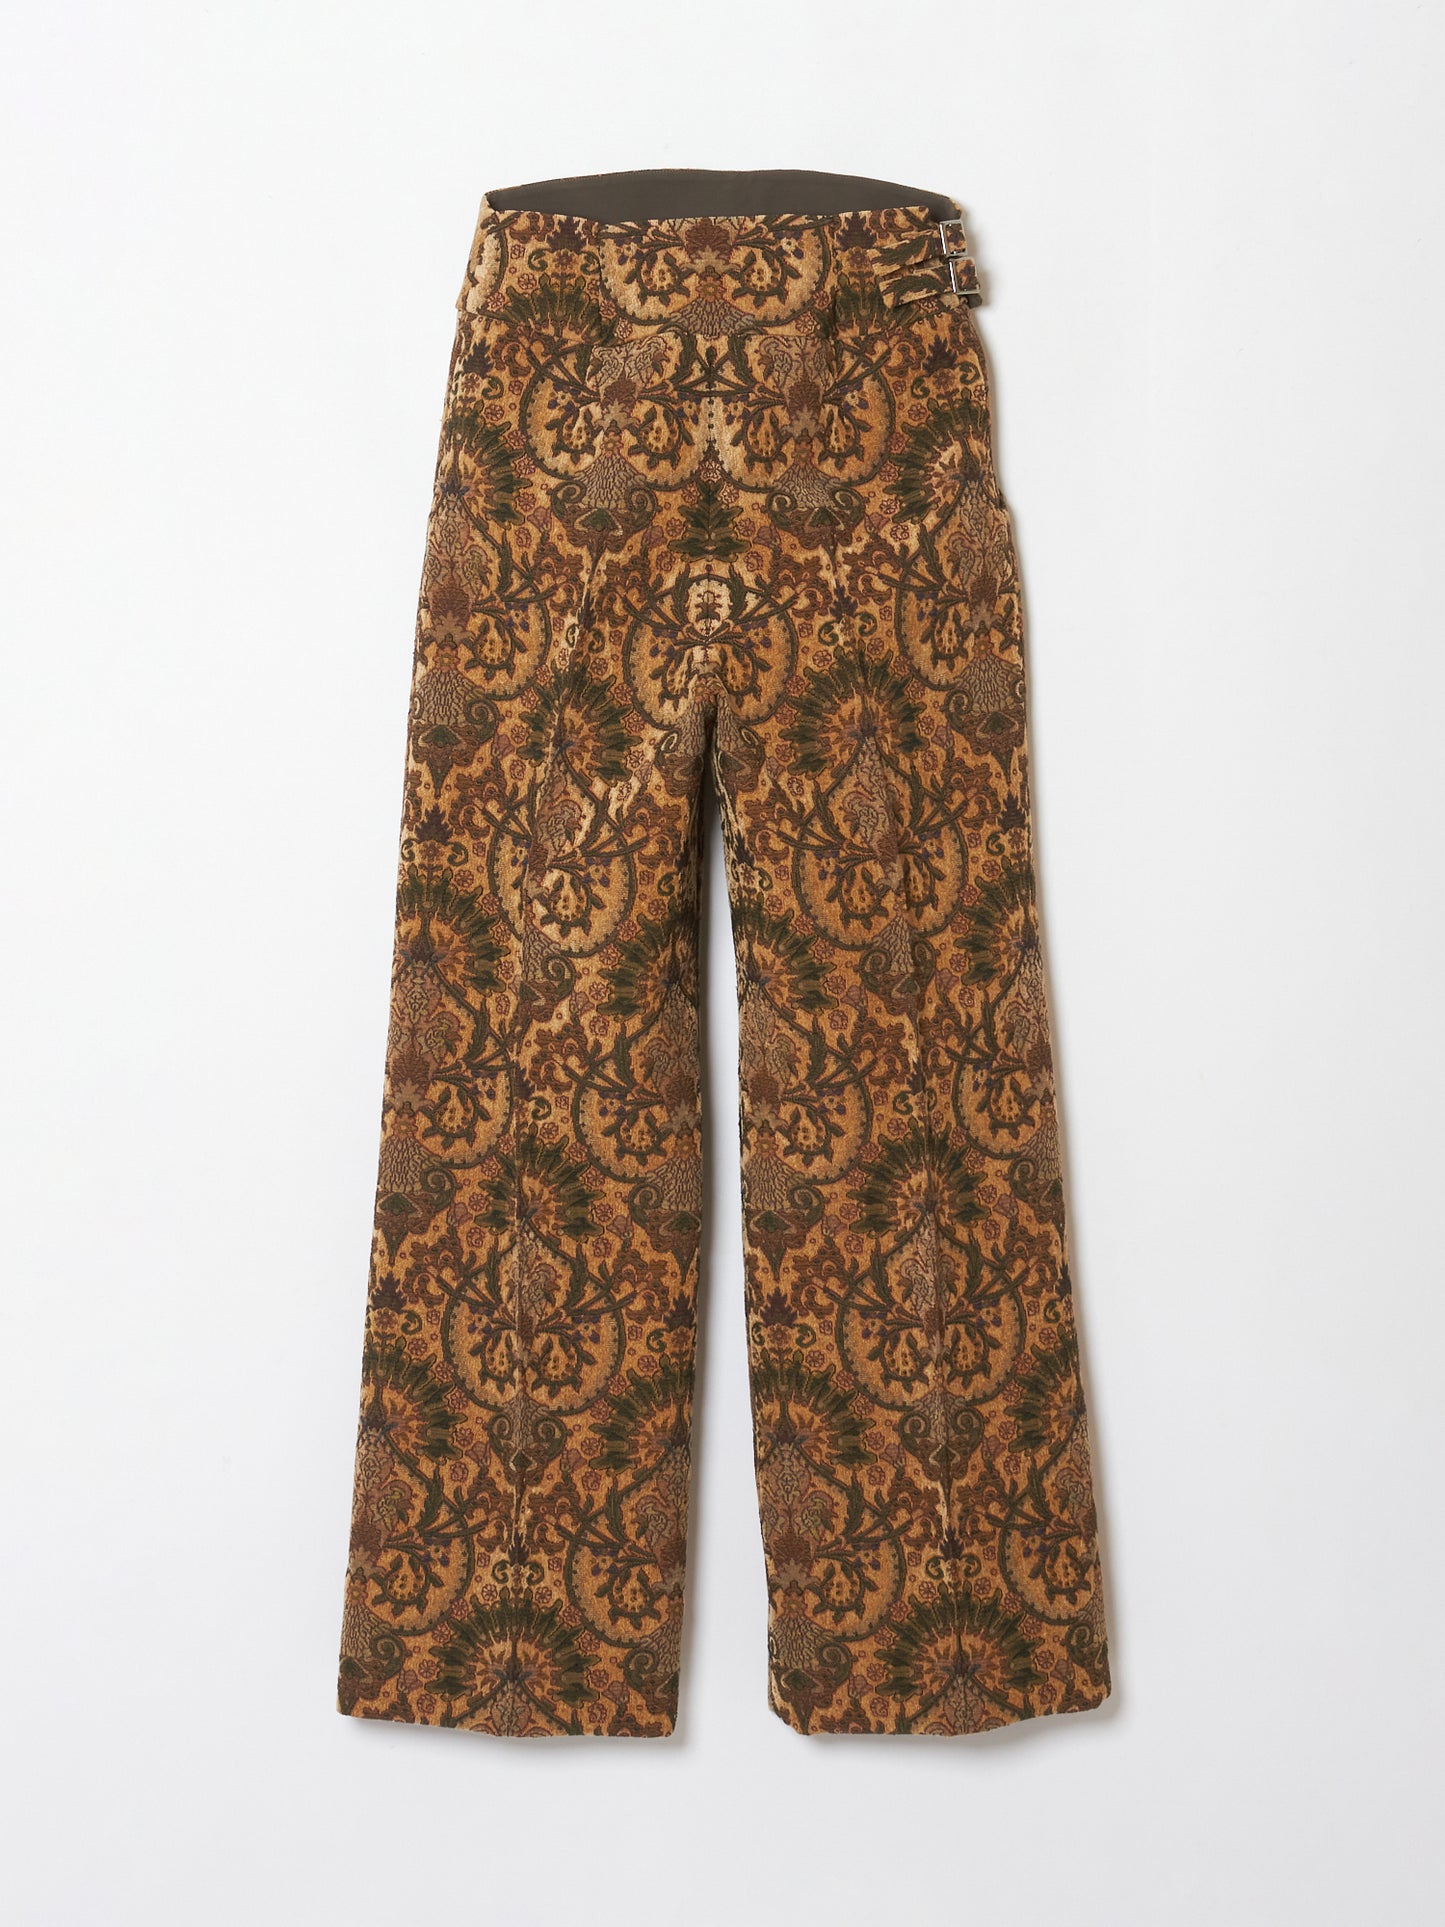 arabesque jacquard pants Navy 【Delivery in December 2023】